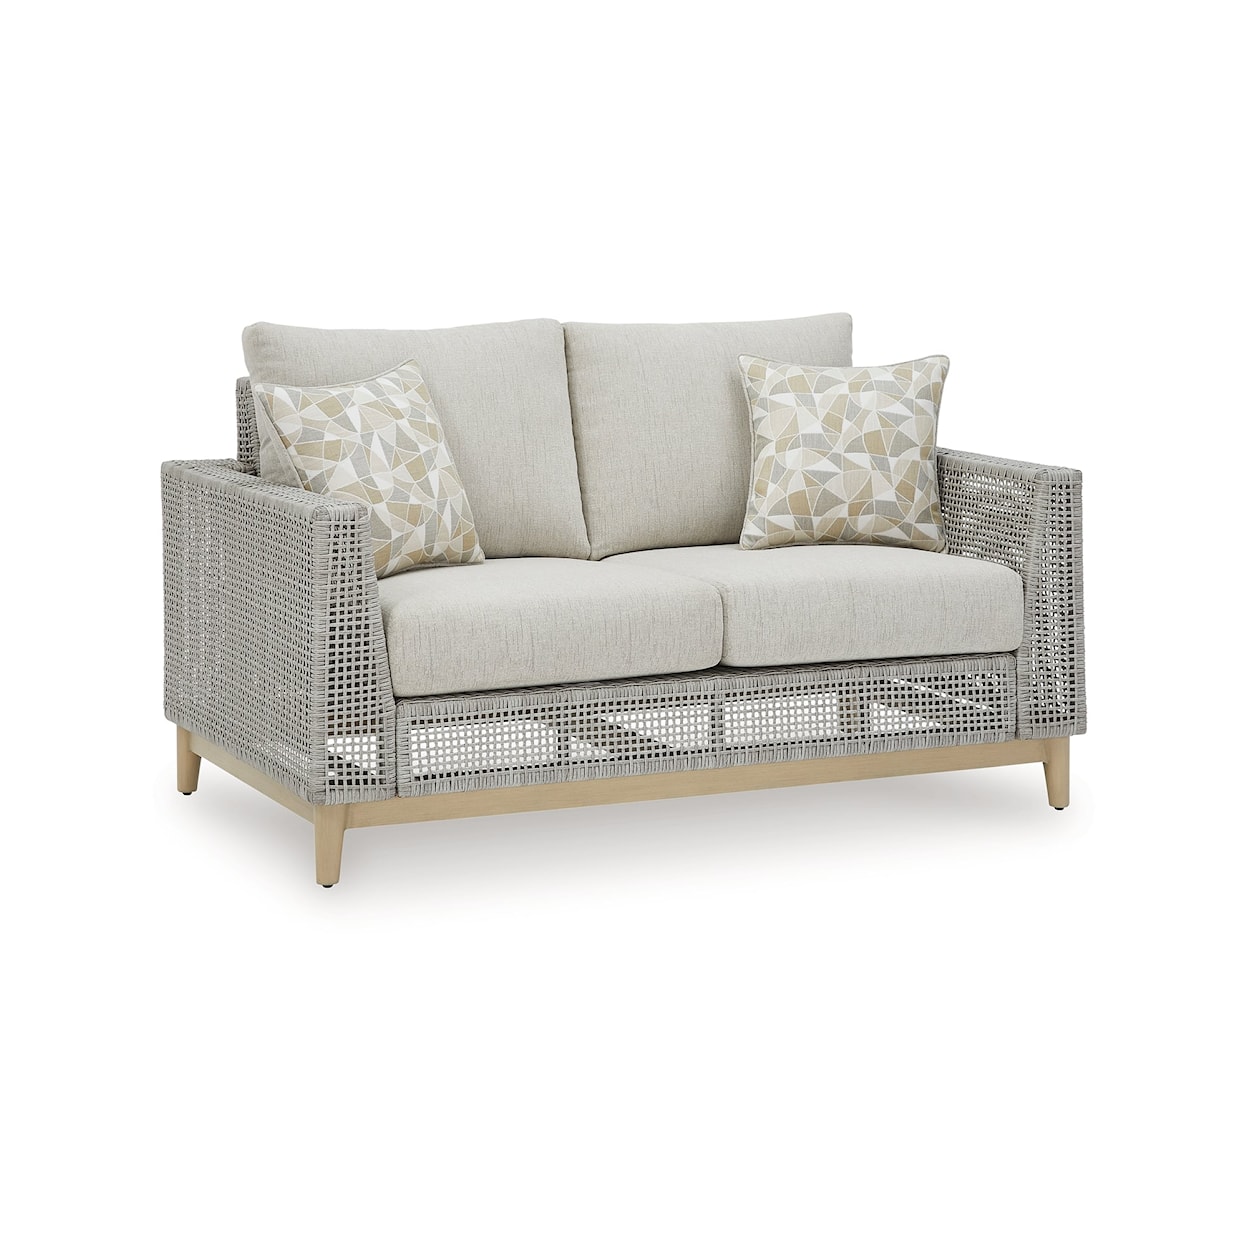 Signature Design by Ashley Seton Creek Outdoor Loveseat with Cushion